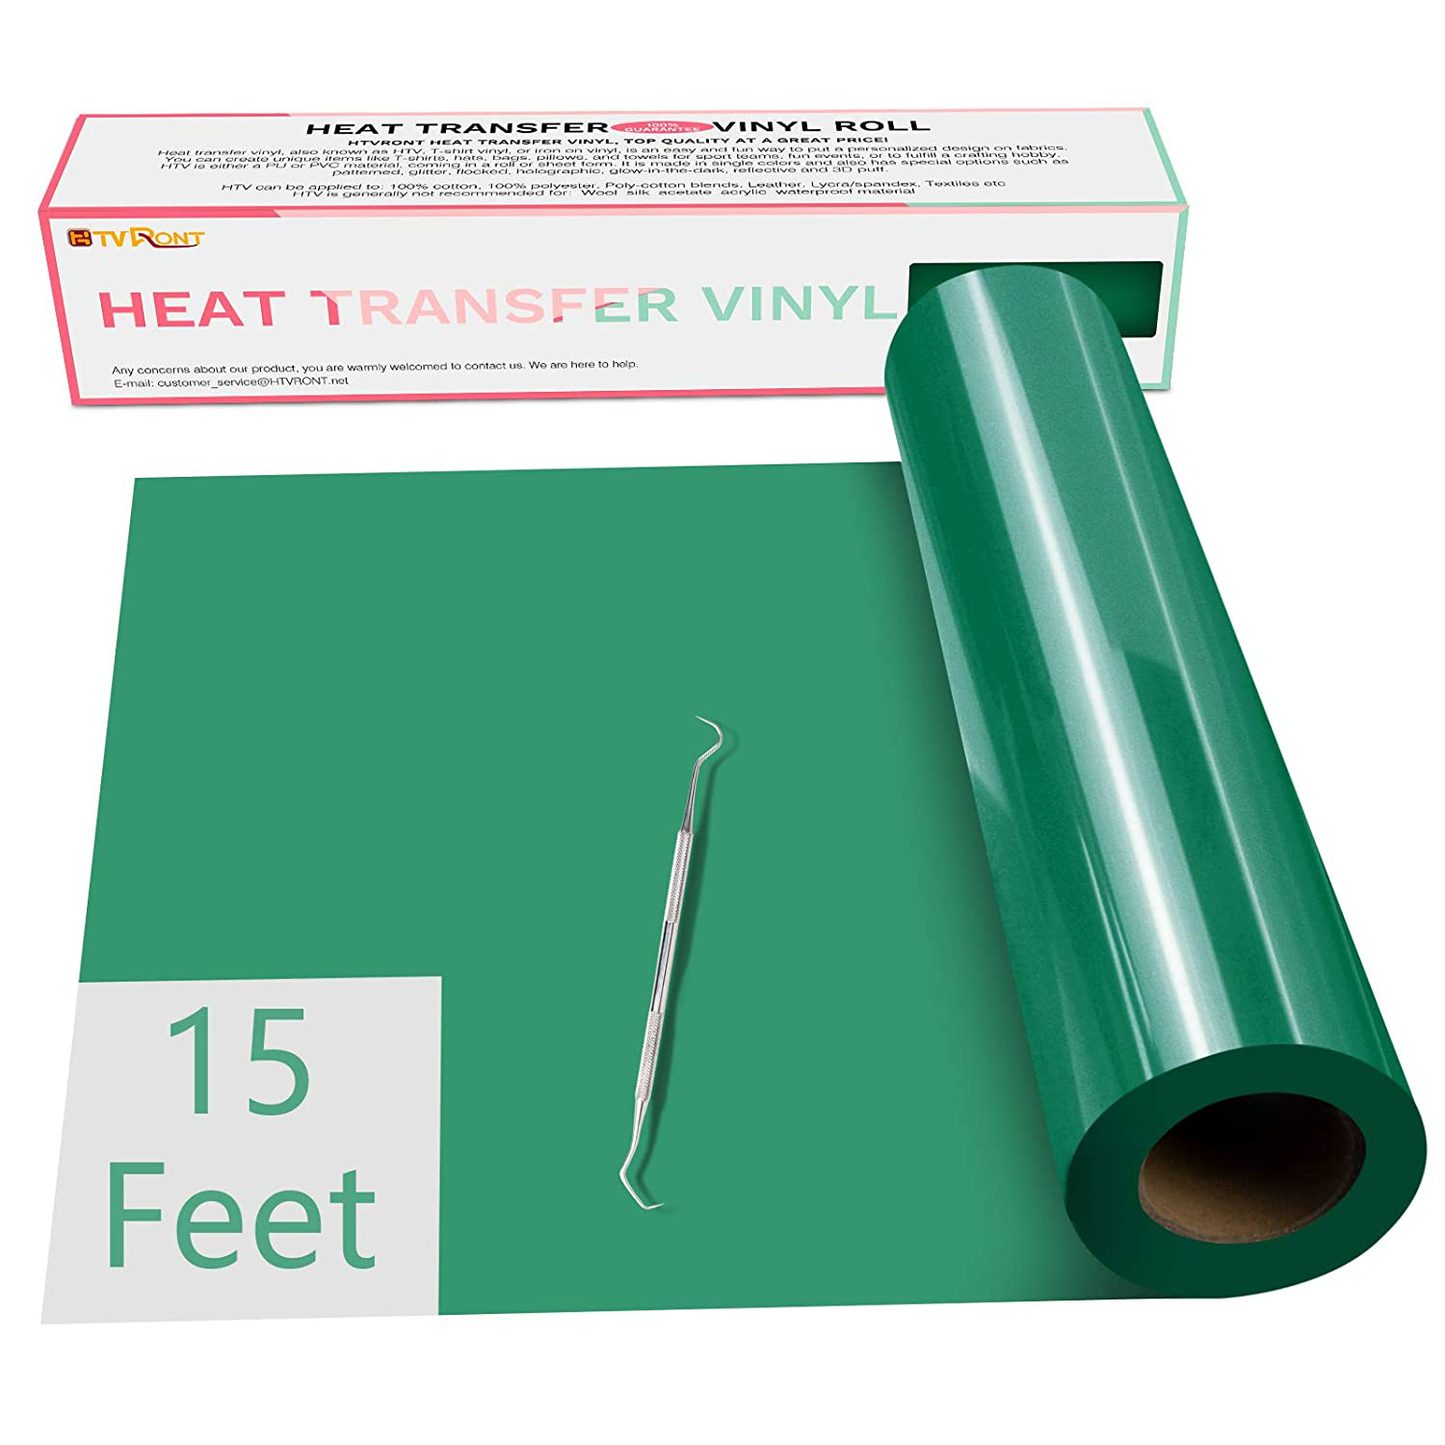 Heat Transfer Vinyl Red HTV Rolls - 12" x 15ft Red Iron on Vinyl for Cricut & Silhouette Cameo Easy to Cut & Weed for Heat Vinyl Design